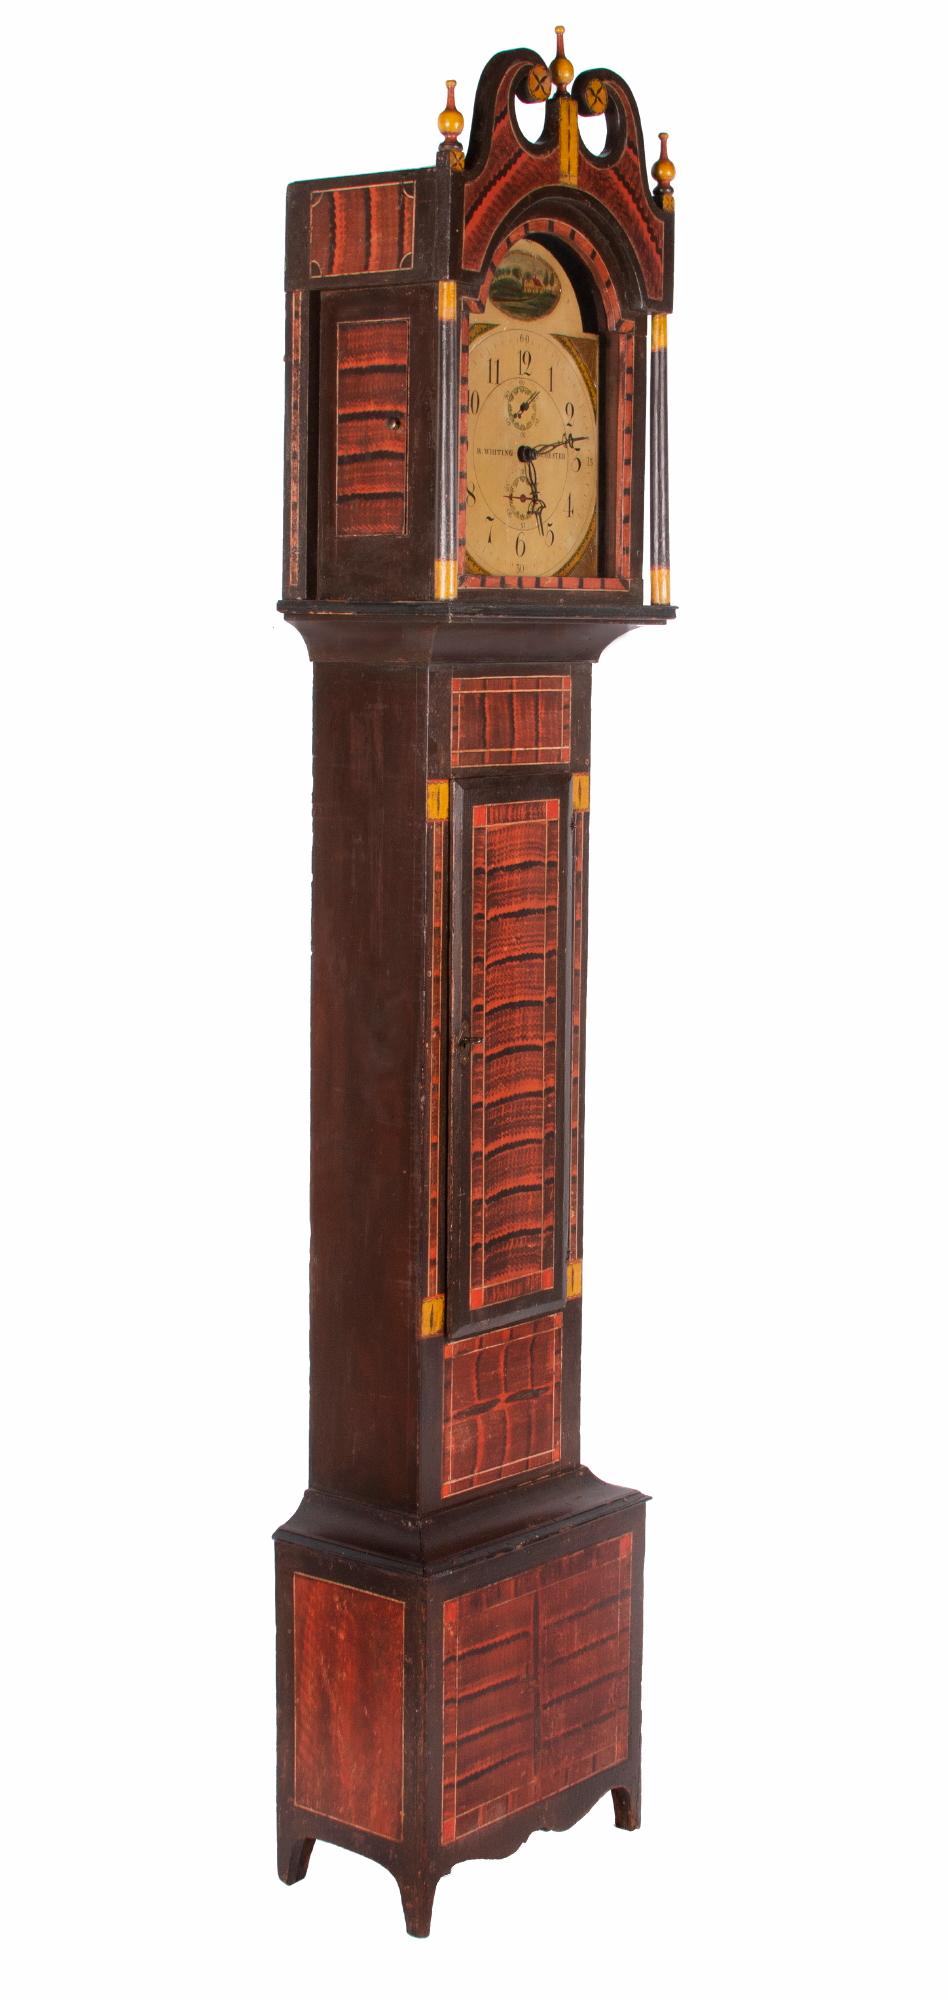 Exuberantly painted, New England tall case clock in dark umber, red, & chrome yellow decoration, with wooden works by riley whiting, Plymouth, Connecticut, ca 1819-1835

This wonderful tall case clock is one of a known and very special group of